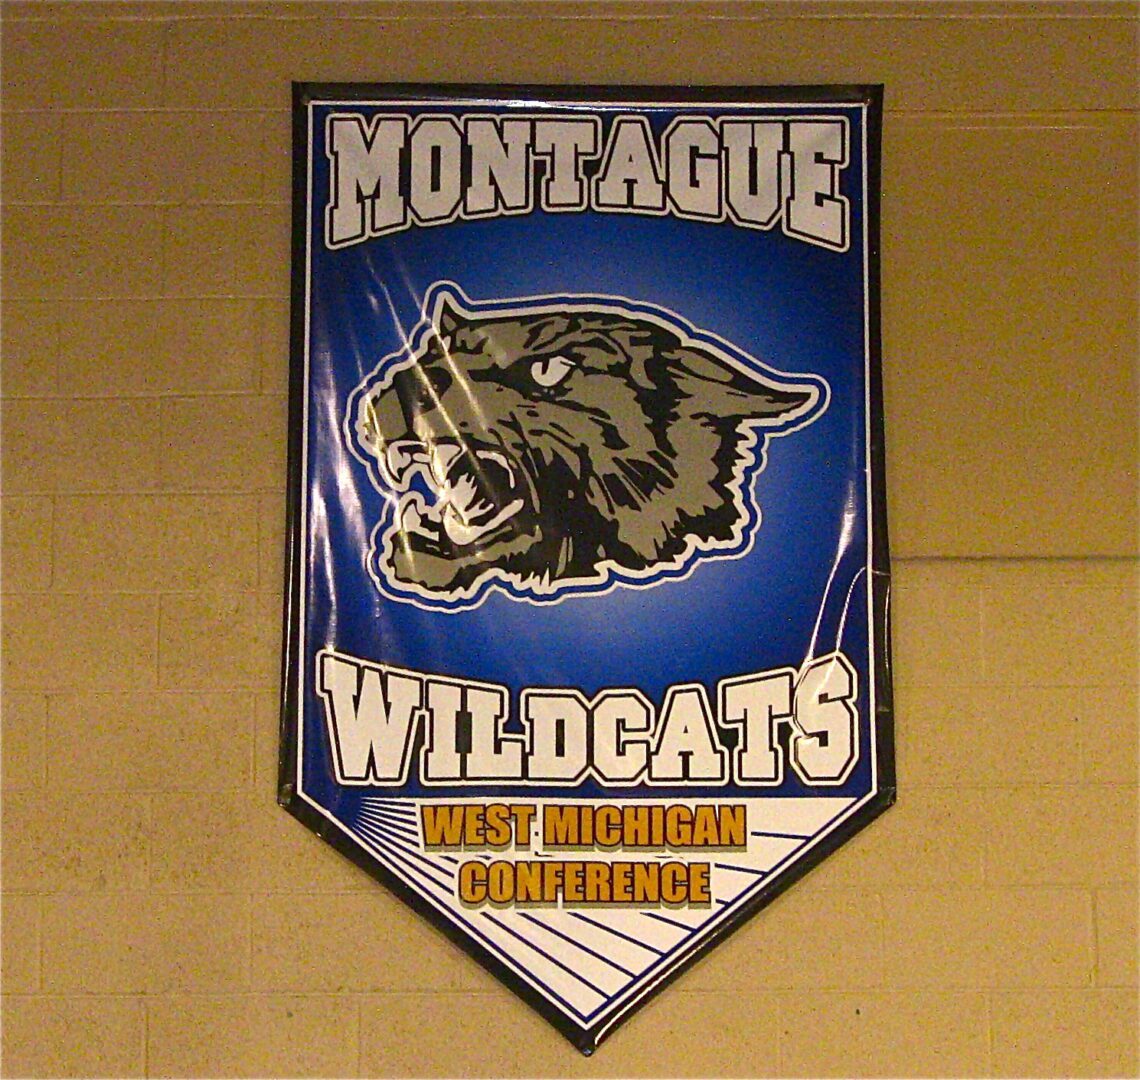 Luke Vanboxel scores 29 points to lead Montague to first basketball win of the season over Orchard View